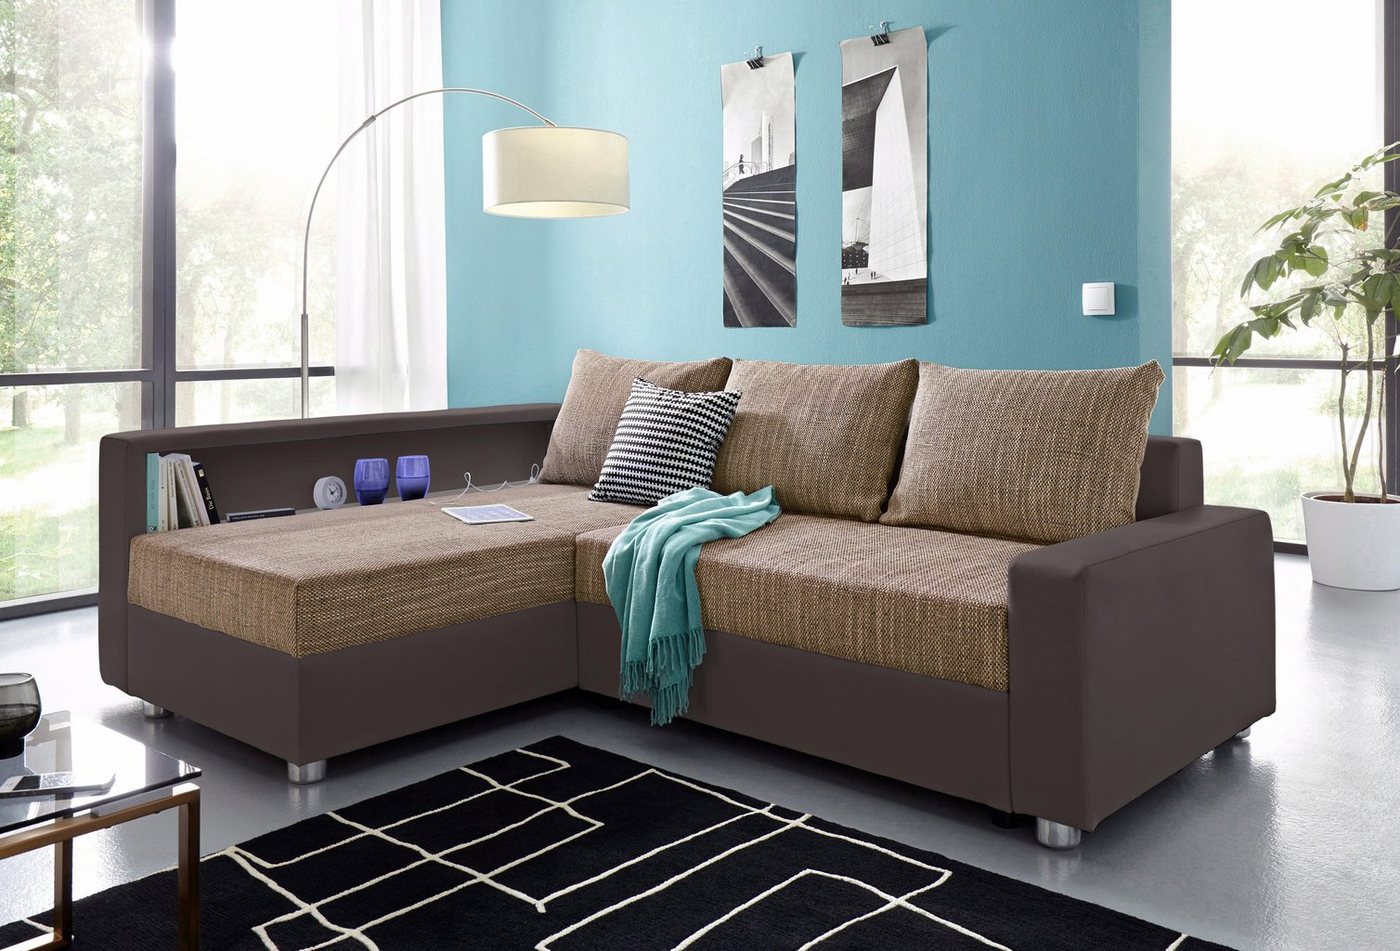 COLLECTION AB Ecksofa Relax, inklusive Bettfunktion, Federkern, wahlweise mit RGB-LED-Beleuchtung von COLLECTION AB